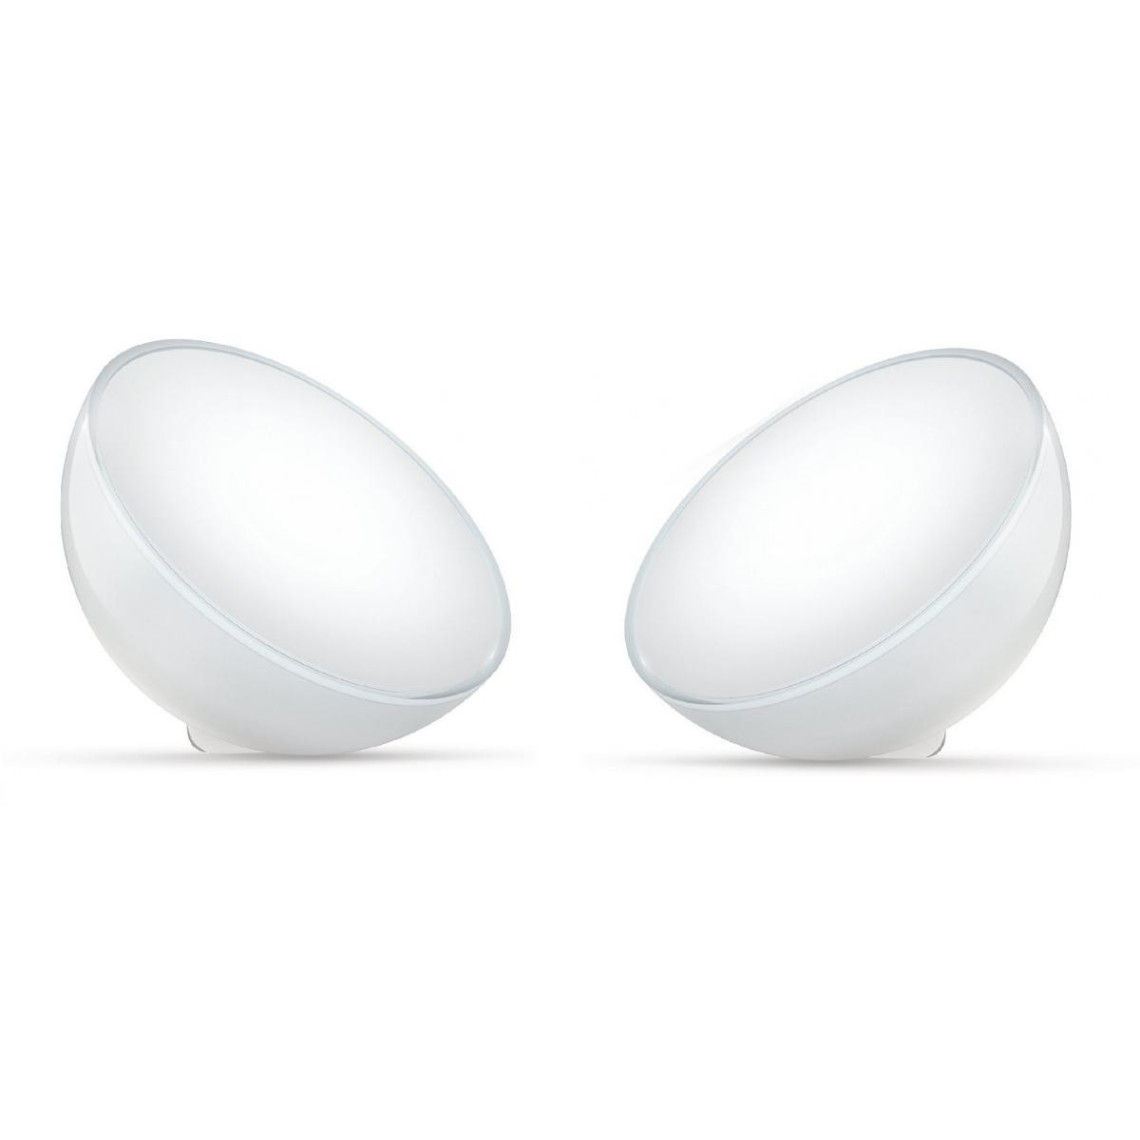 2x Go White Color Ambiance V2 Bluetooth